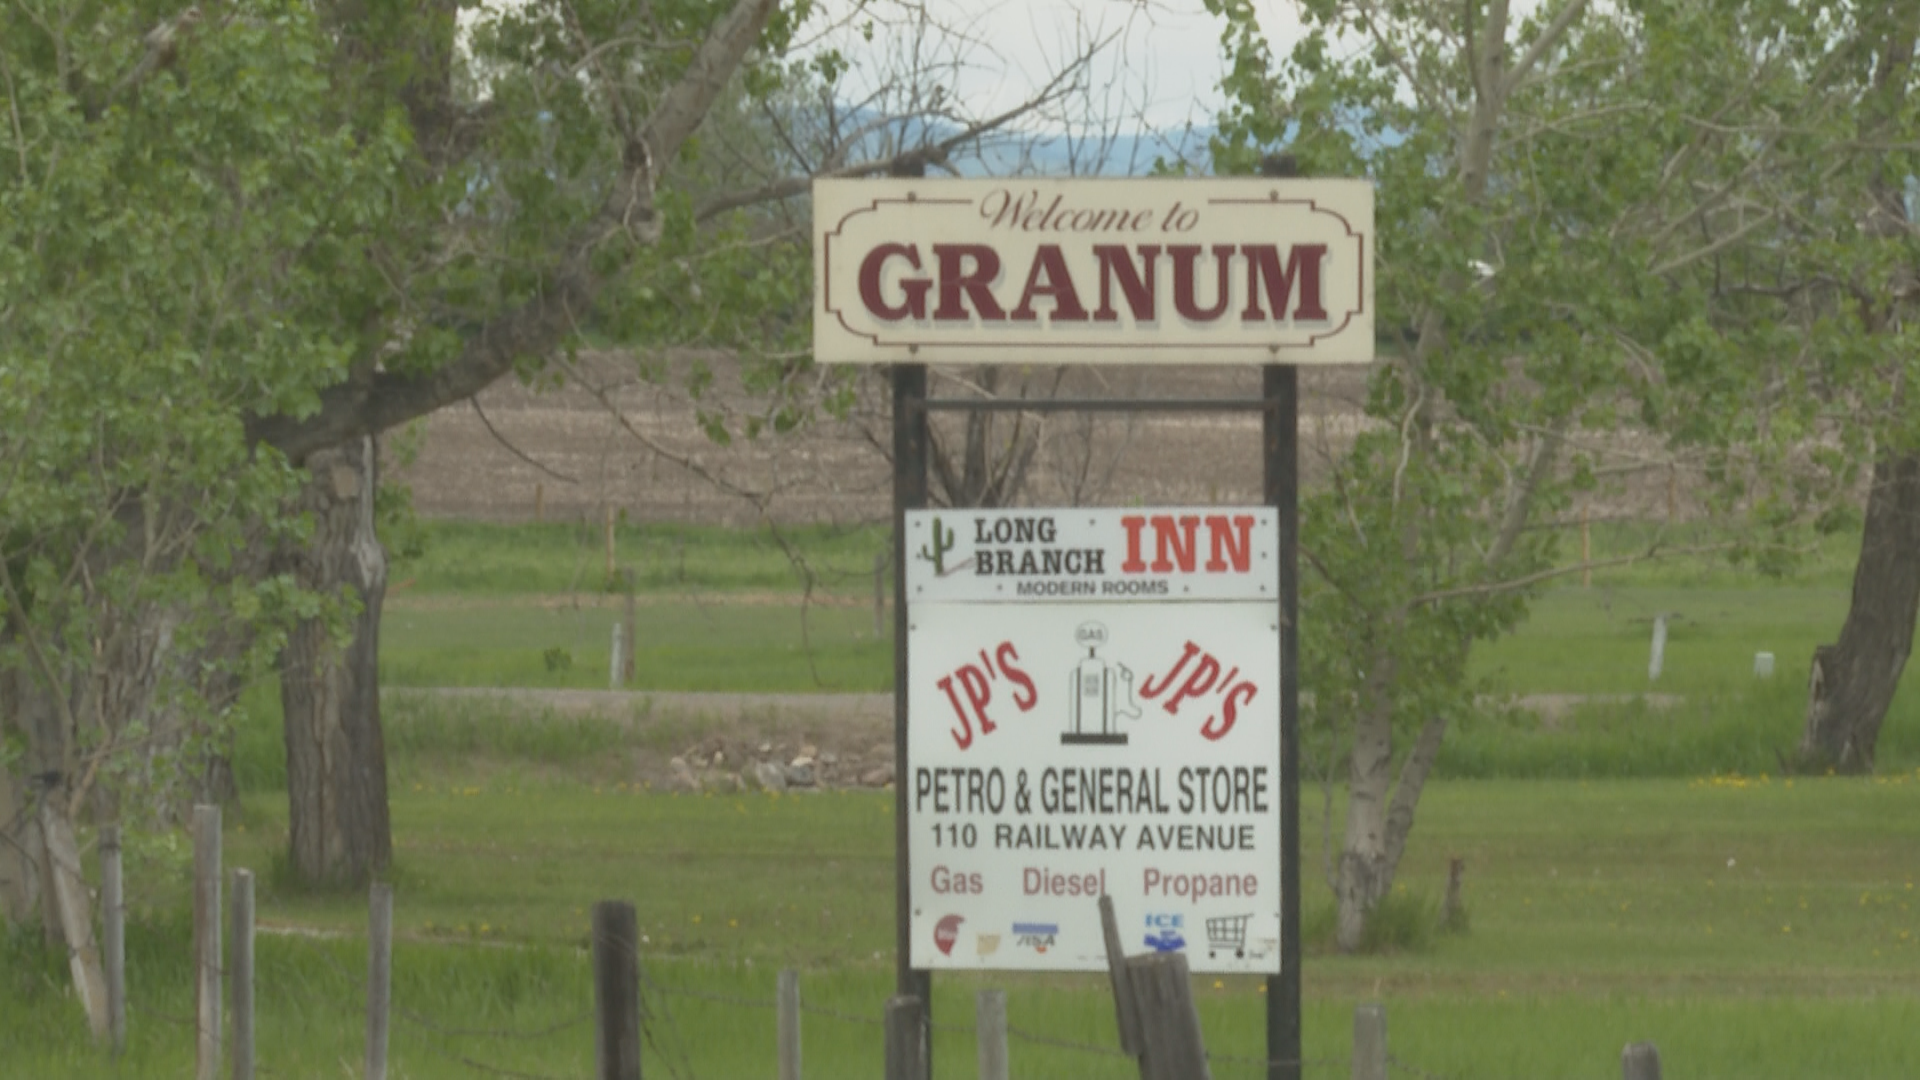 Granum rallies to support family business after robbery gone wrong